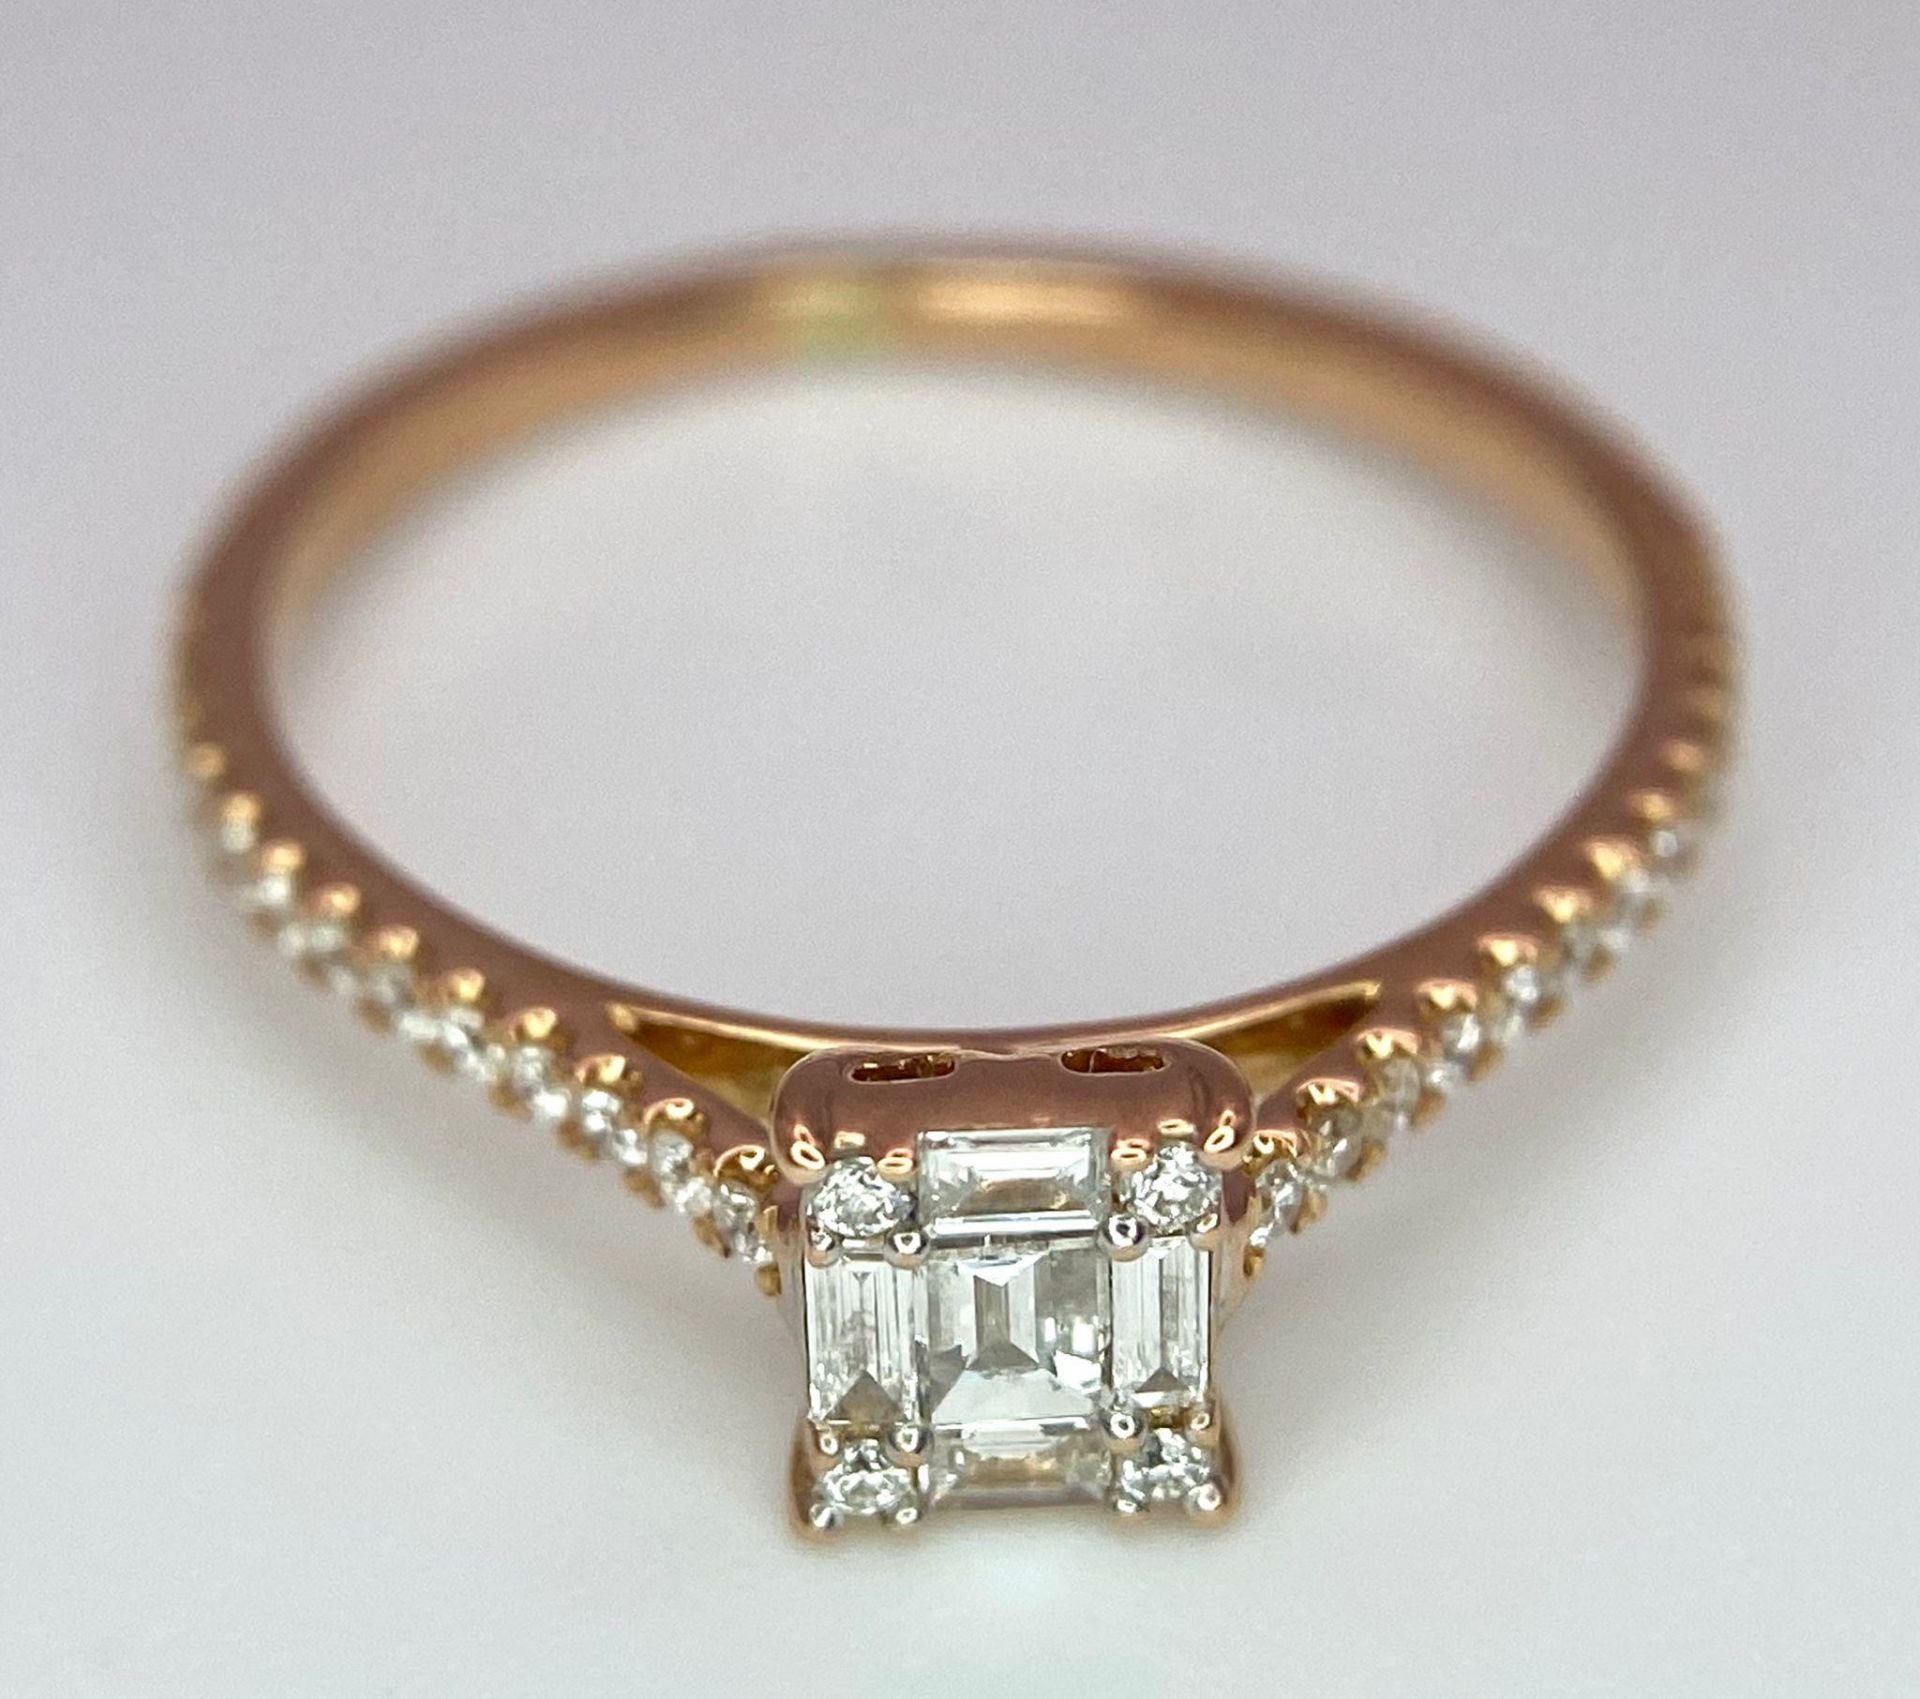 An 18 K rose gold ring with a square emerald cut diamond and more round cut diamonds on the - Image 4 of 8